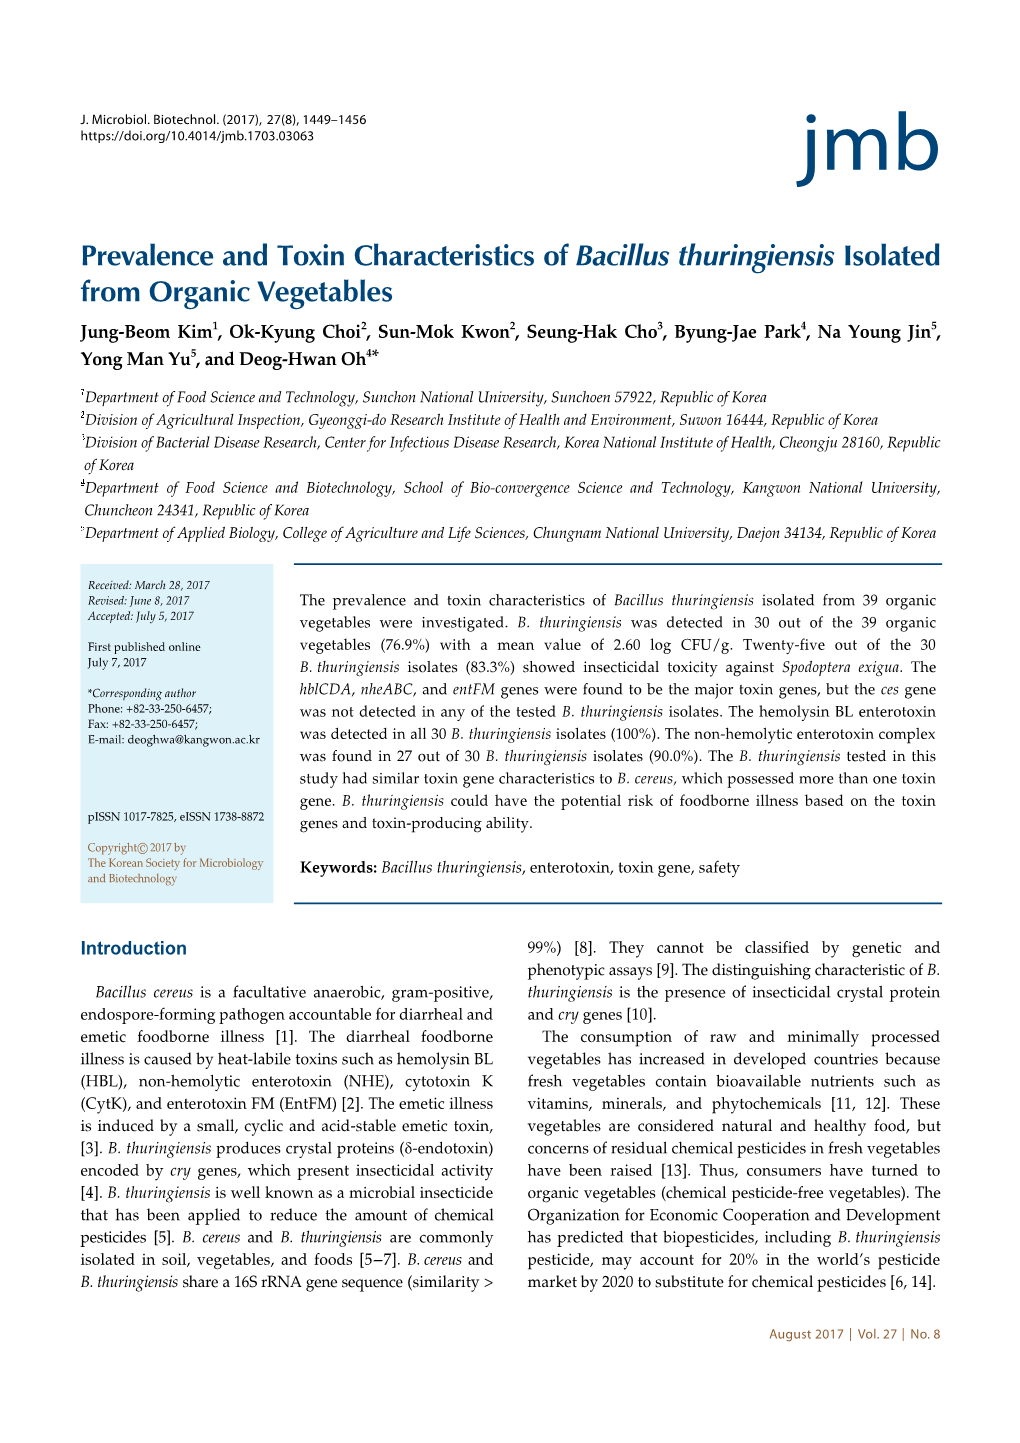 Prevalence and Toxin Characteristics of Bacillus Thuringiensis Isolated